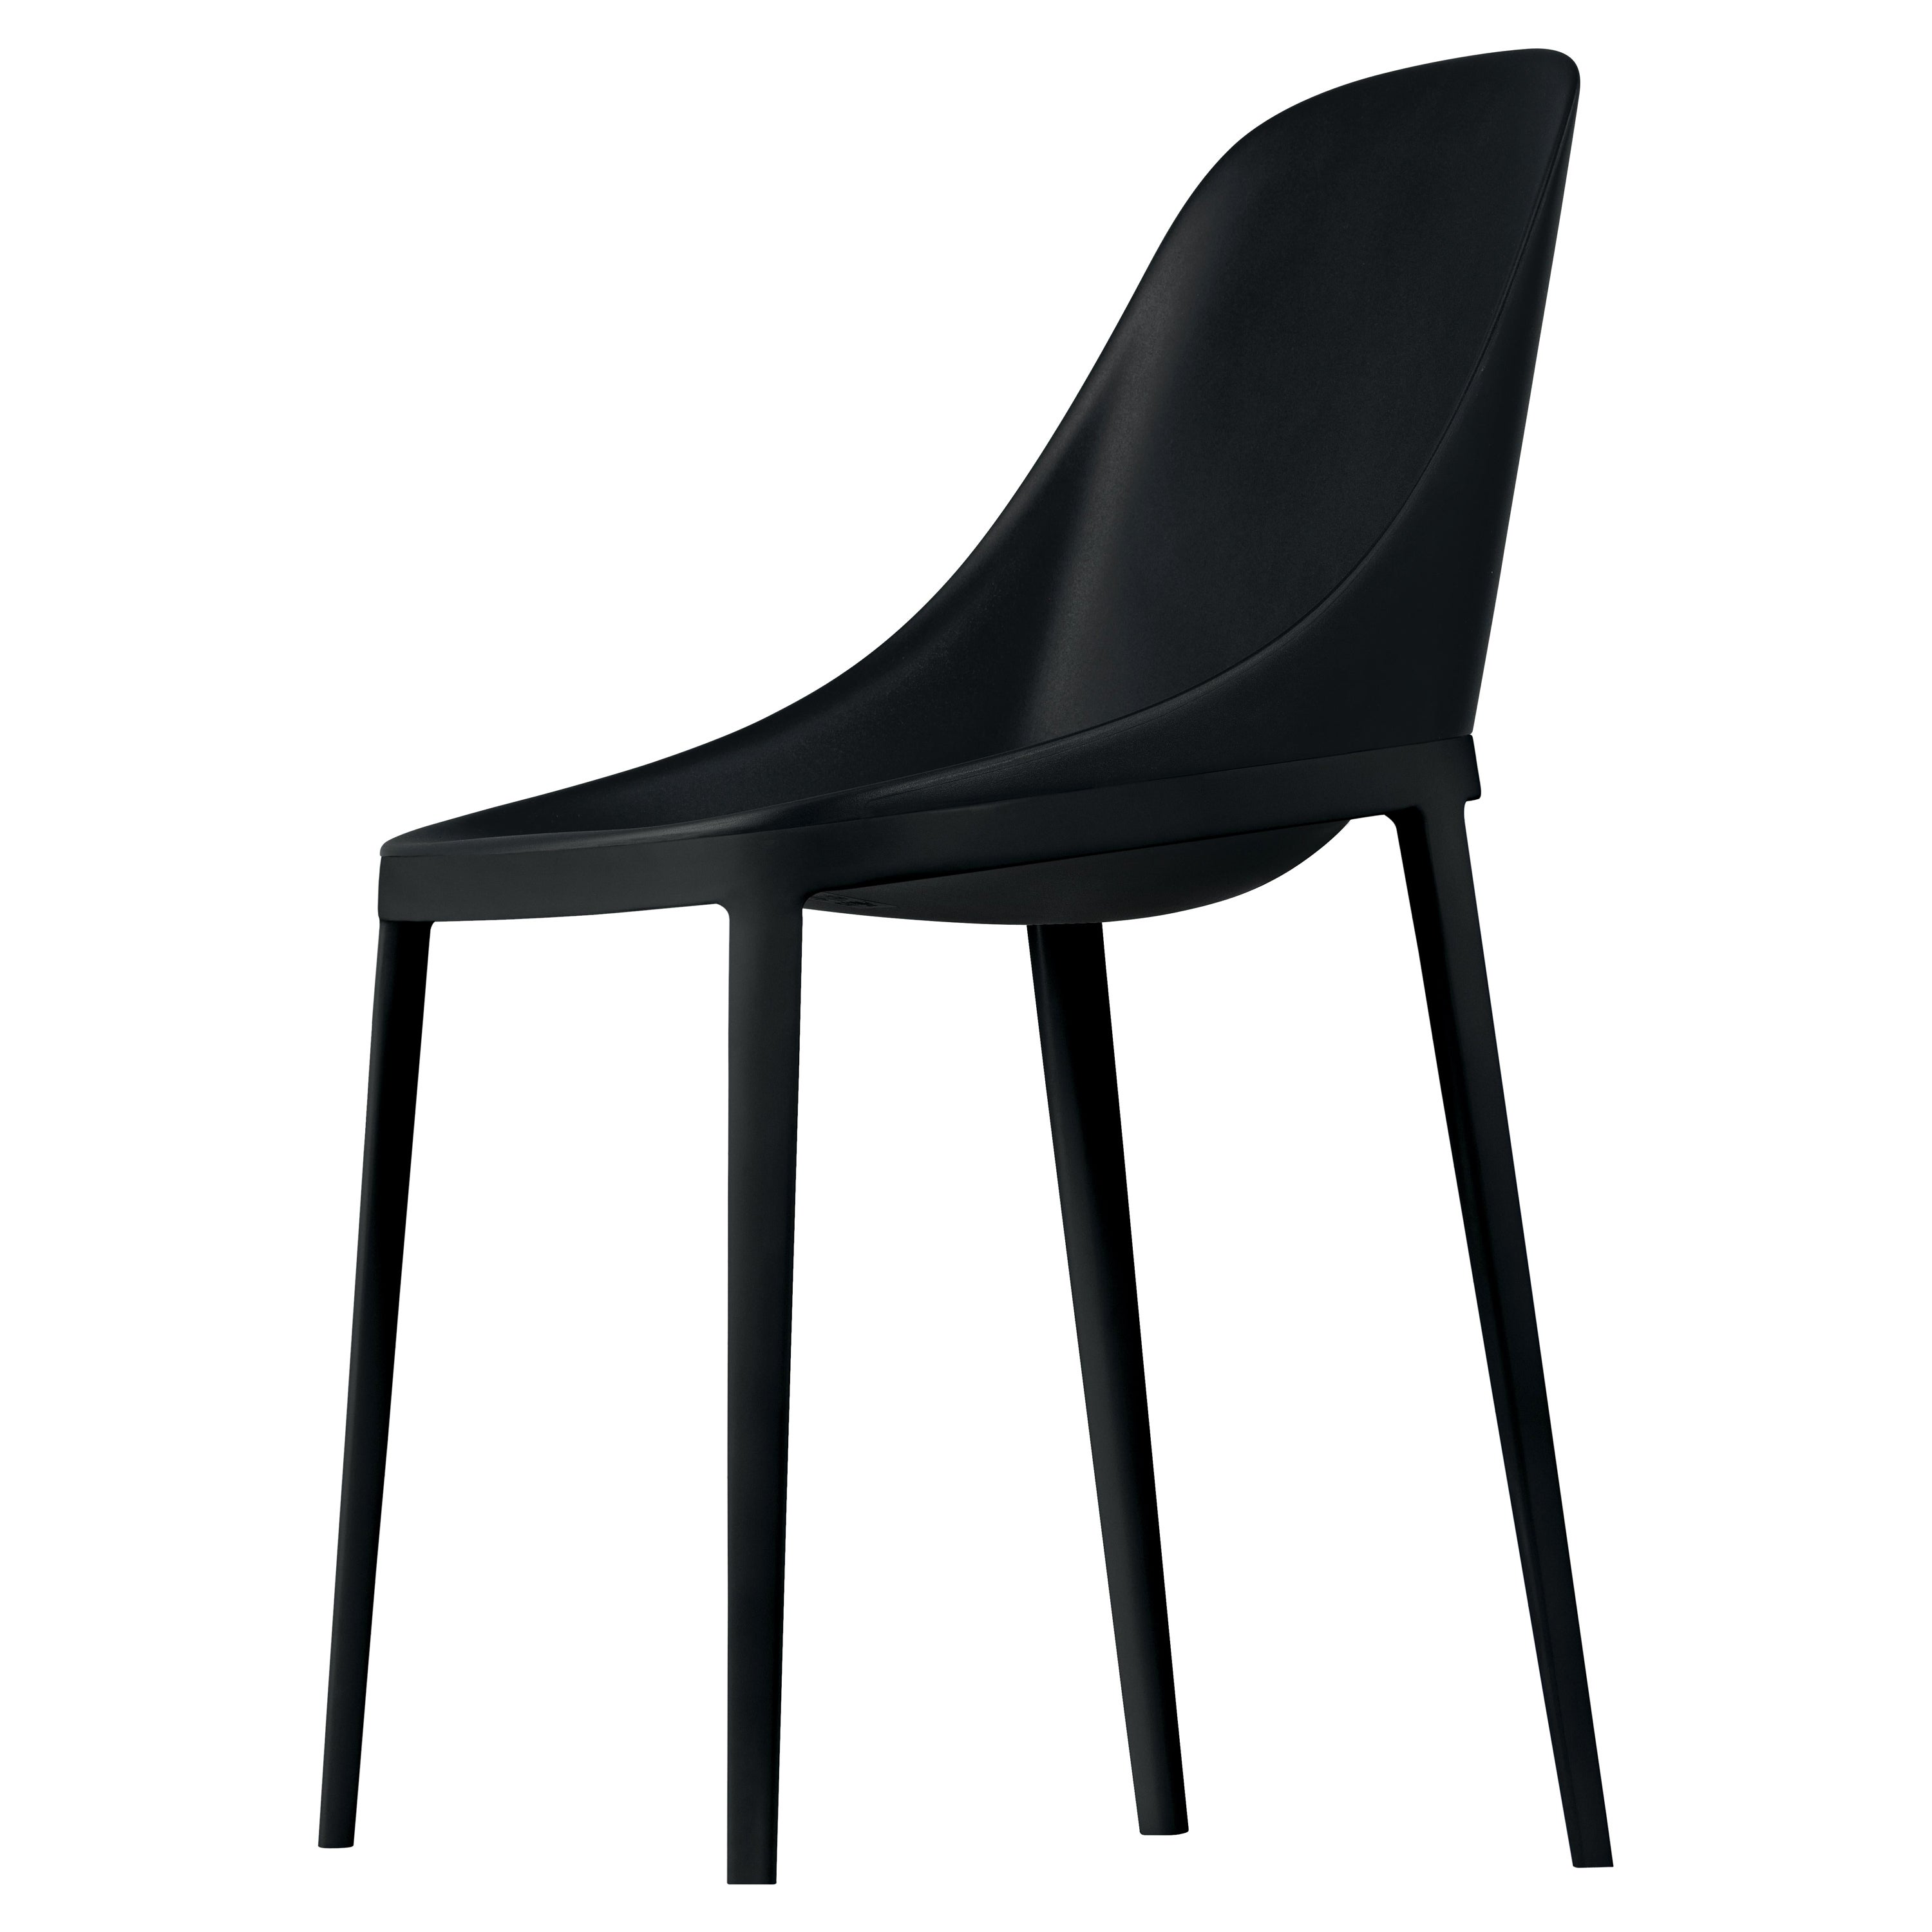 Alias 070 Elle Chair in Black with Lacquered Aluminum Frame by Eugeni Quitllet